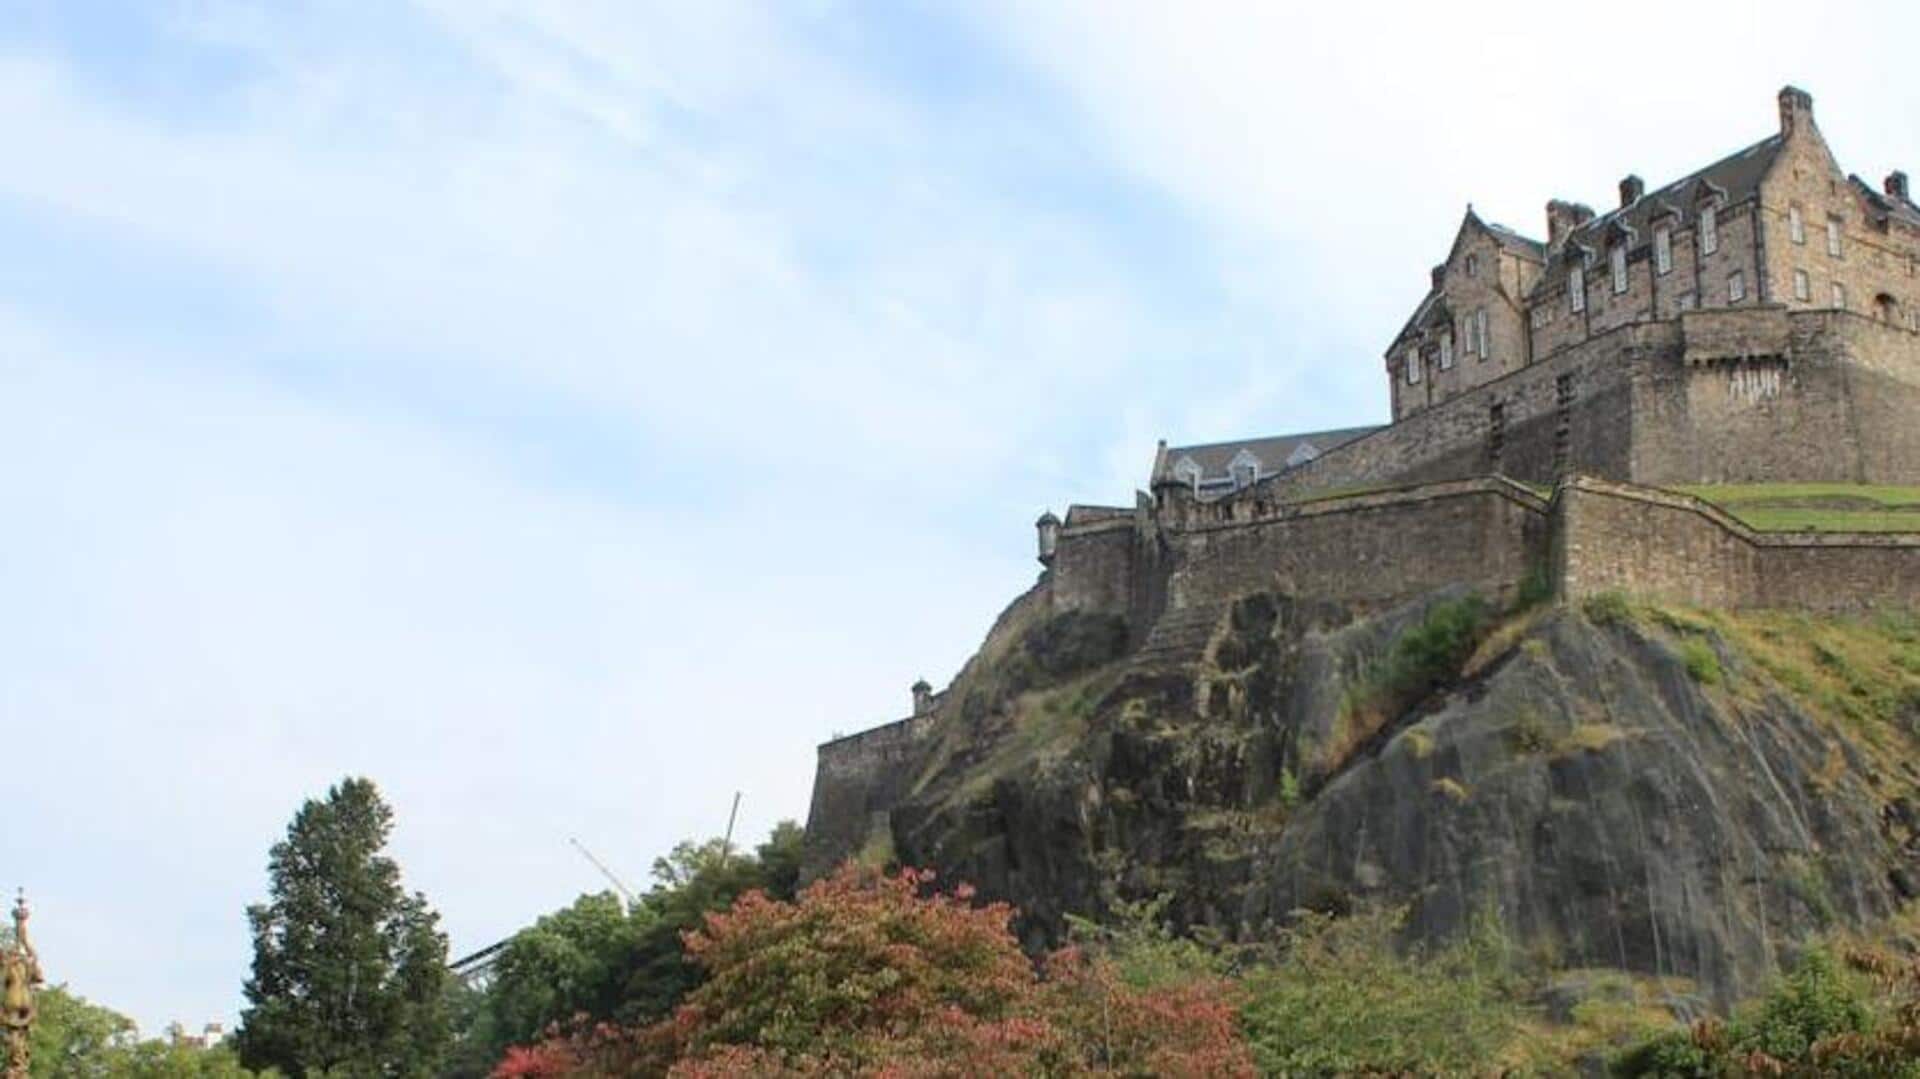 Explore Edinburgh's lesser-known side with this travel guide